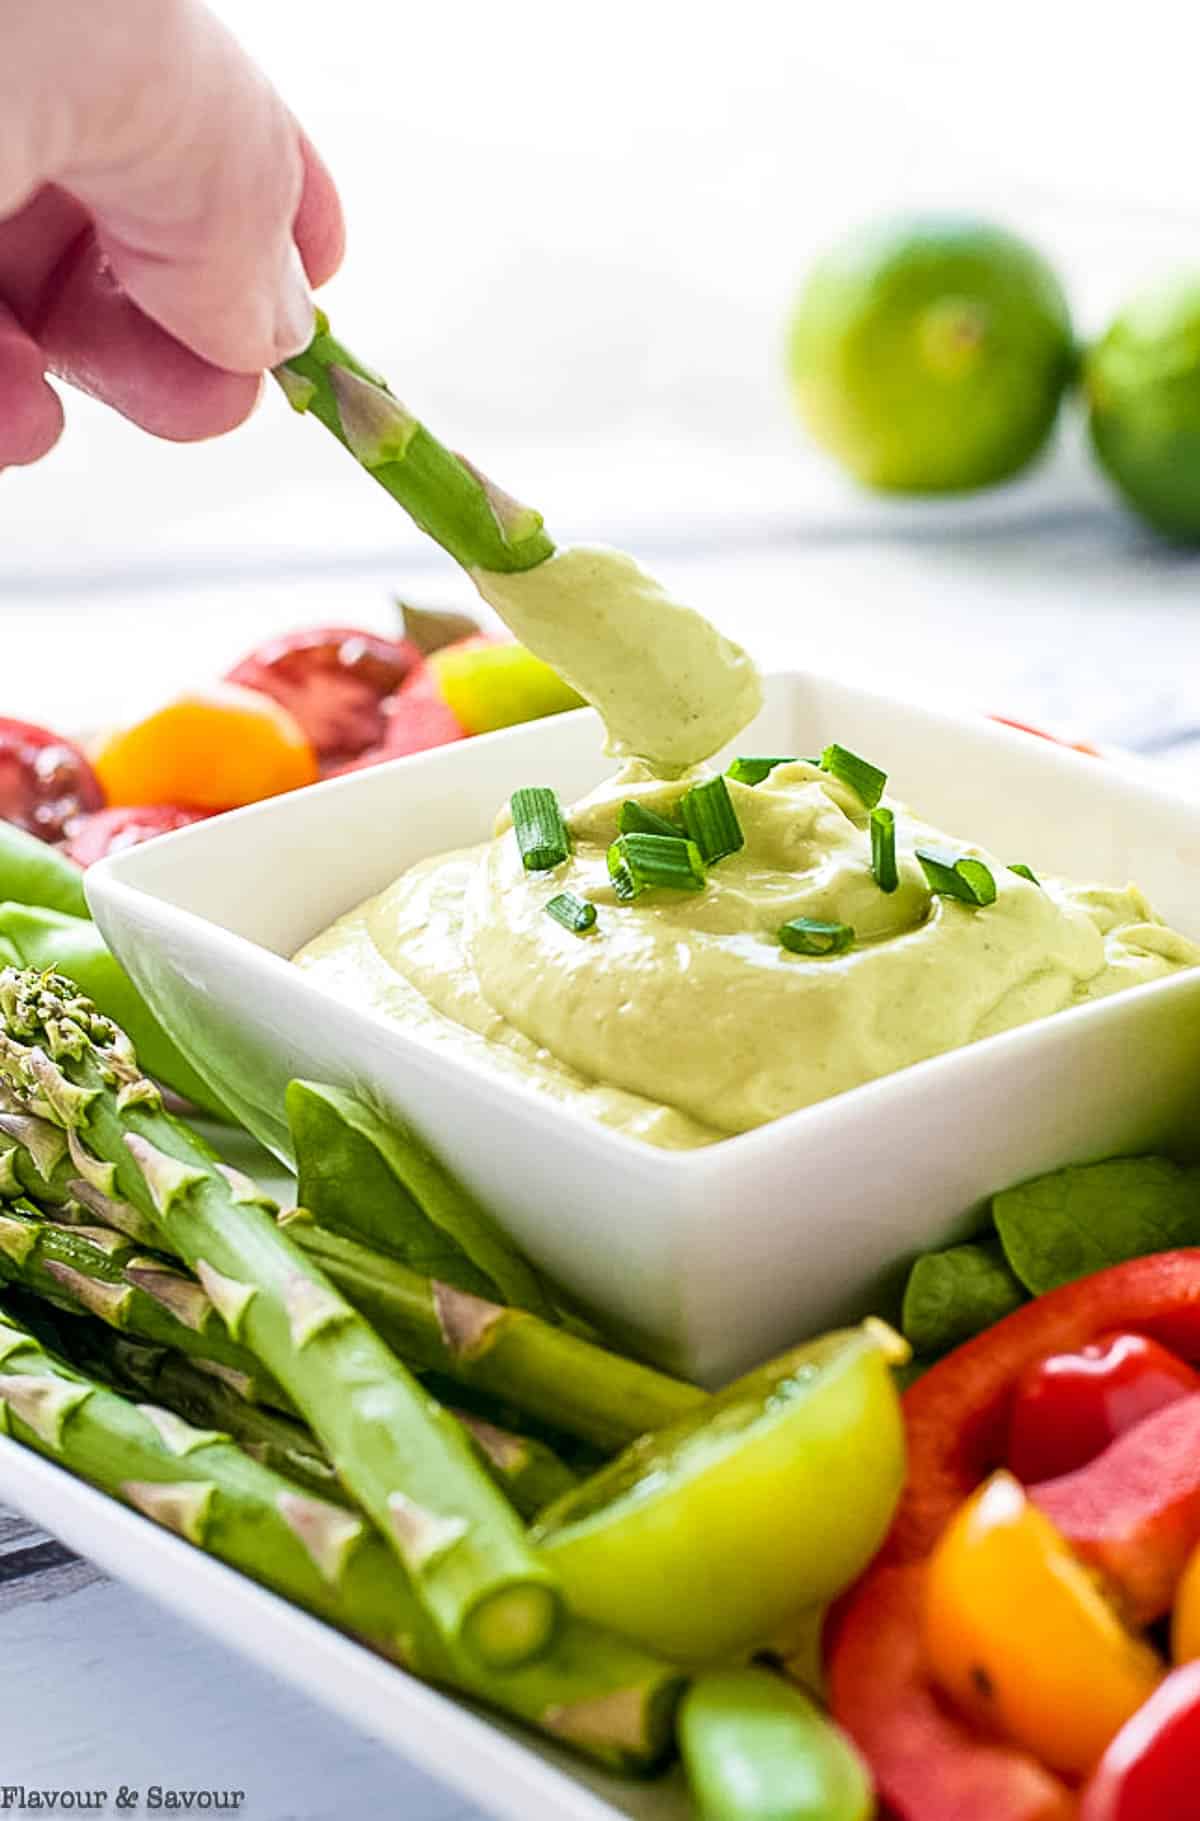 Dipping an asparagus spear into may-free green goddess dip.